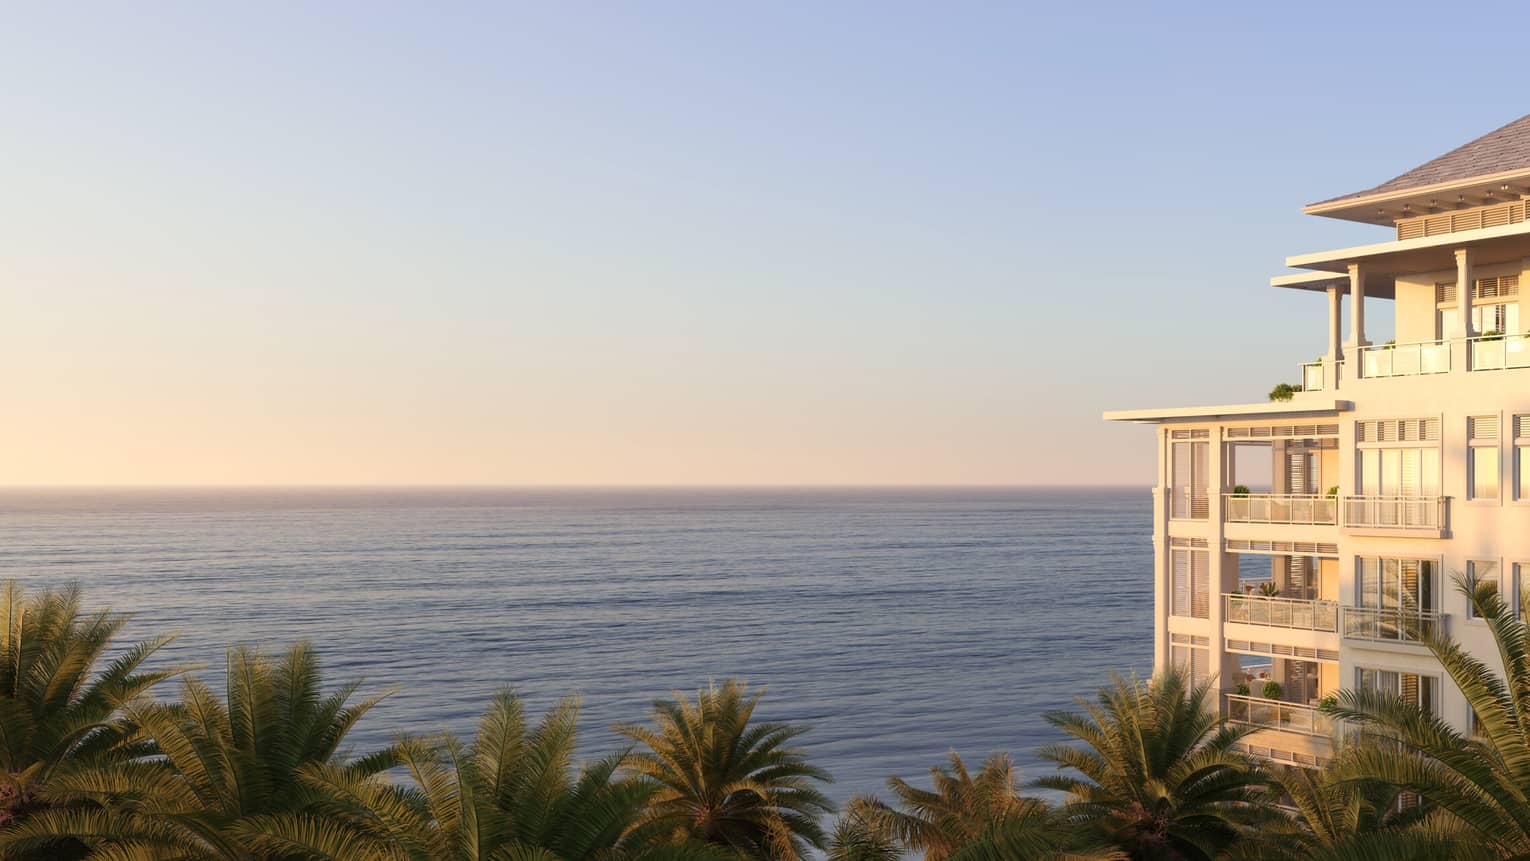 ,Rendering of the exterior a modern residence by the ocean at sunset